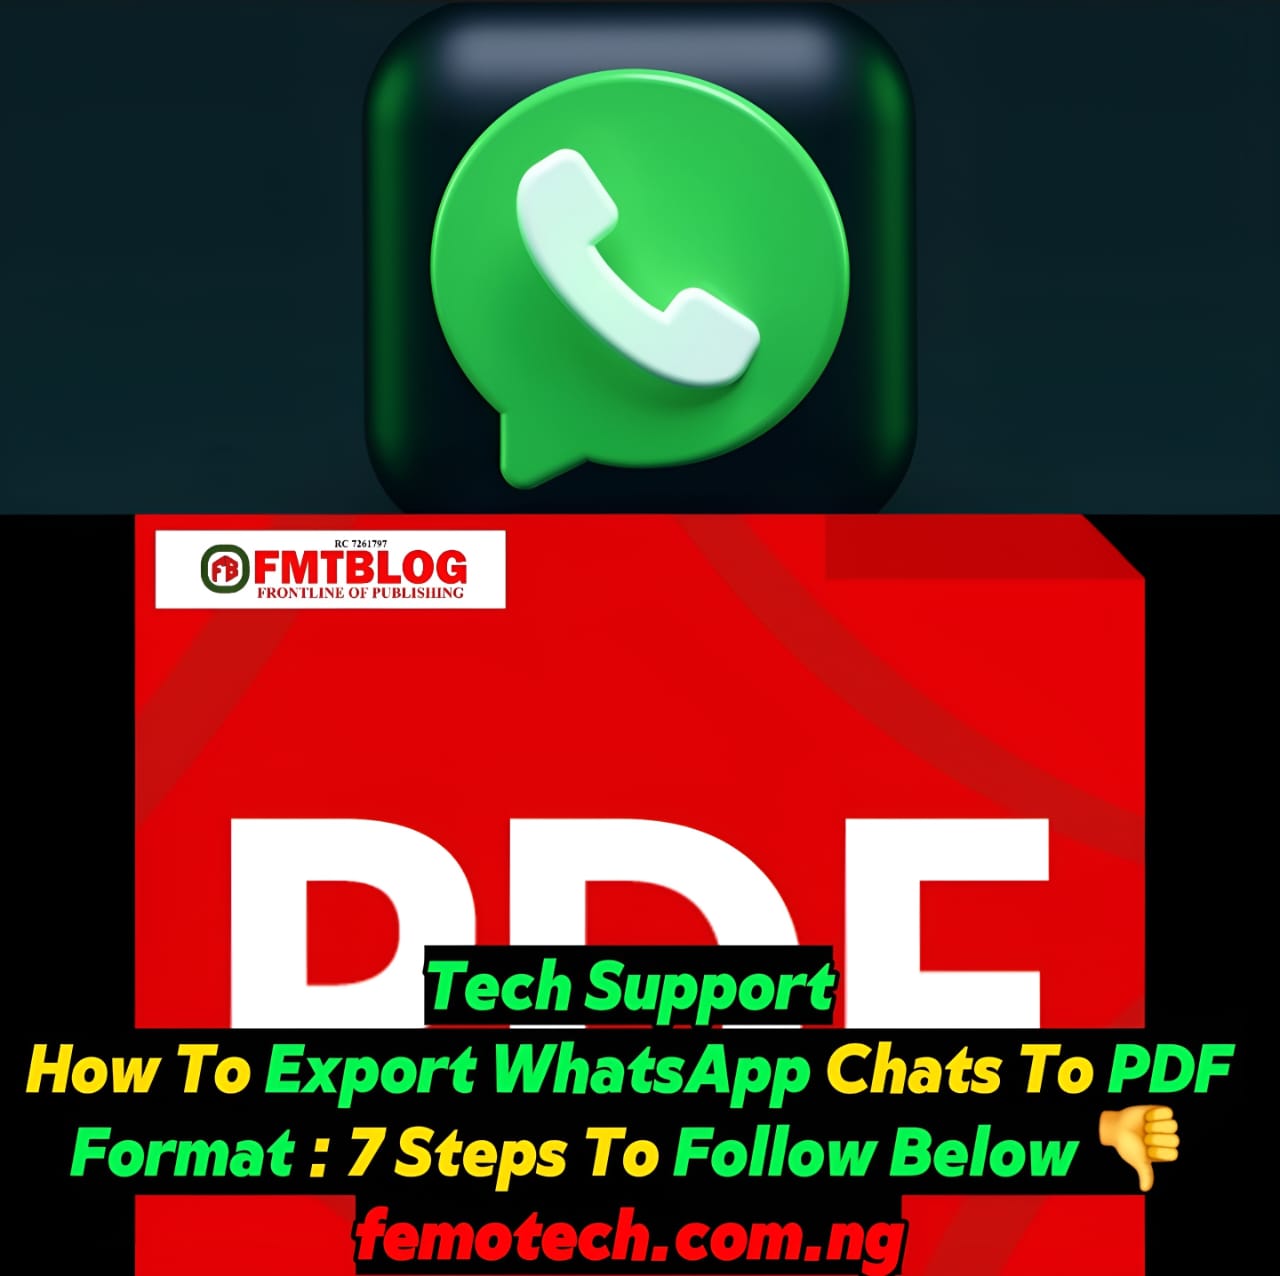 How To Export WhatsApp Chats To PDF Format : 7 Steps To Follow Below 👎